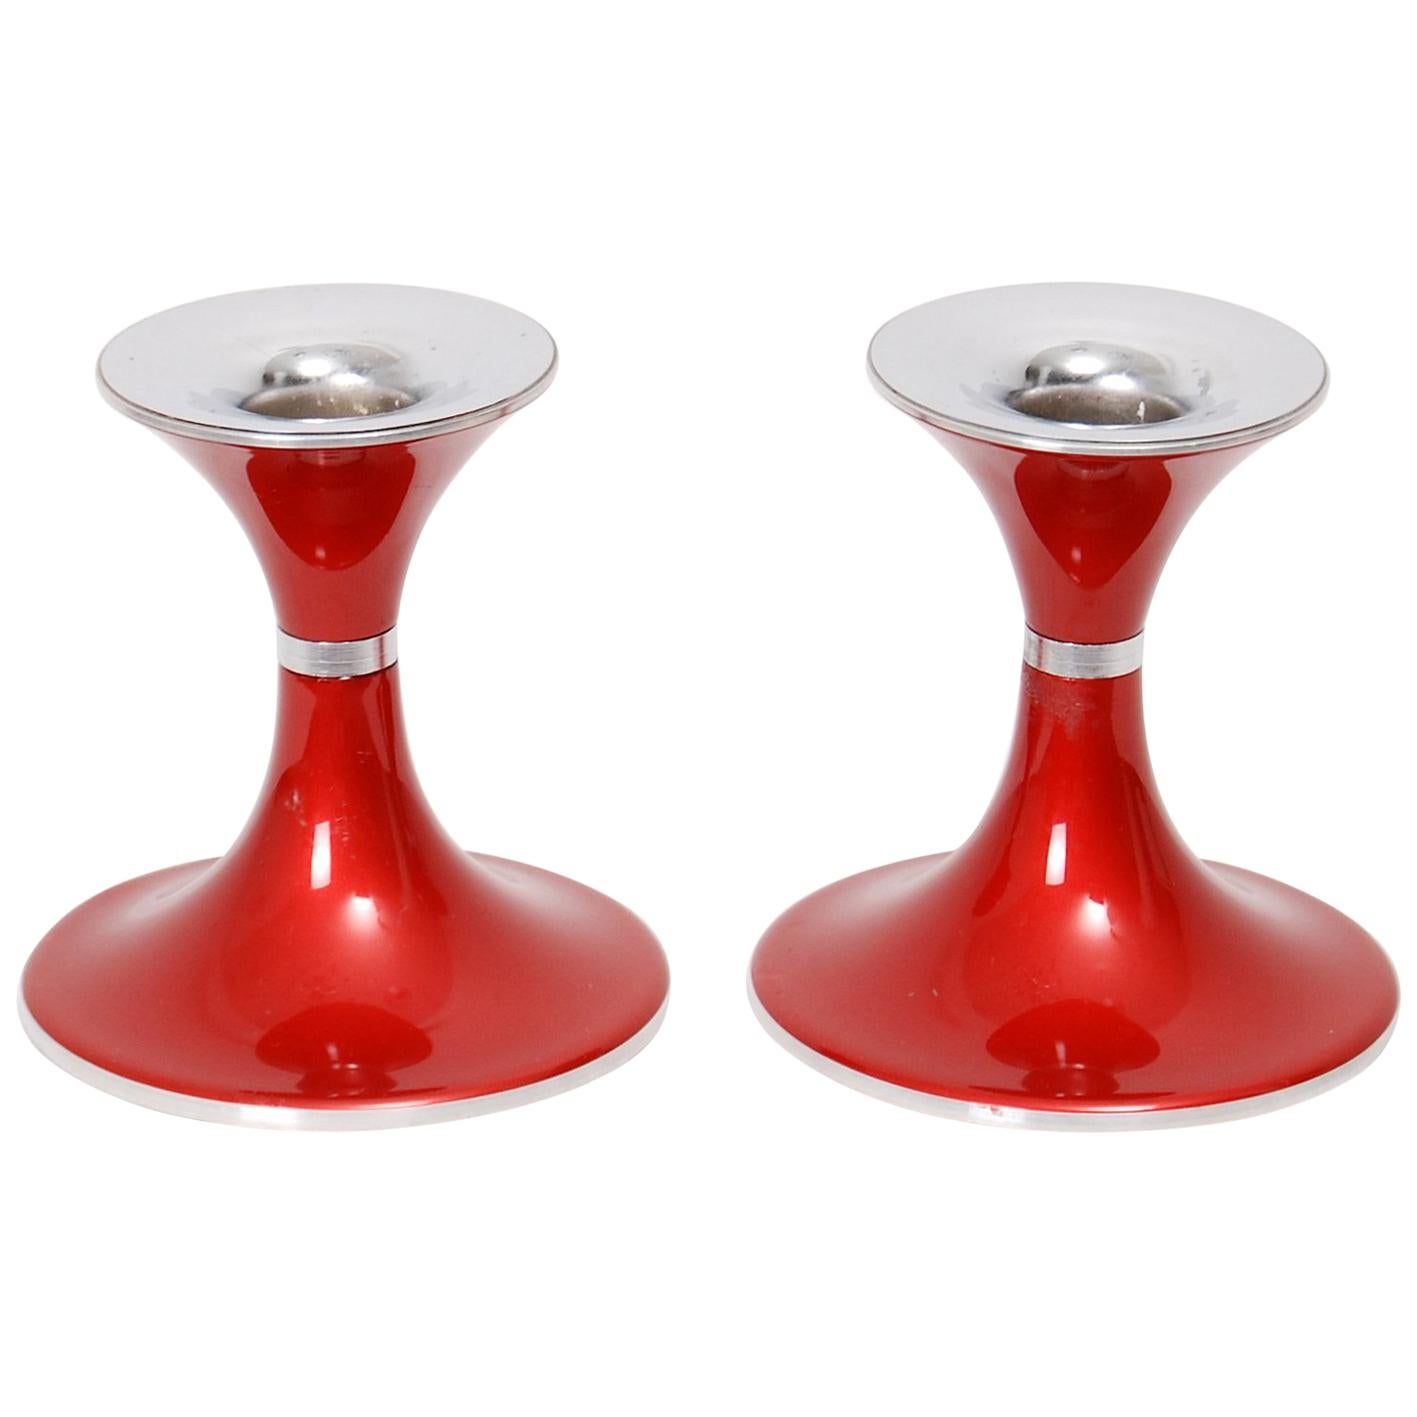 Mid-Century Modern Pair of Red Enamel Candlesticks by Emalox Norway, 1960s